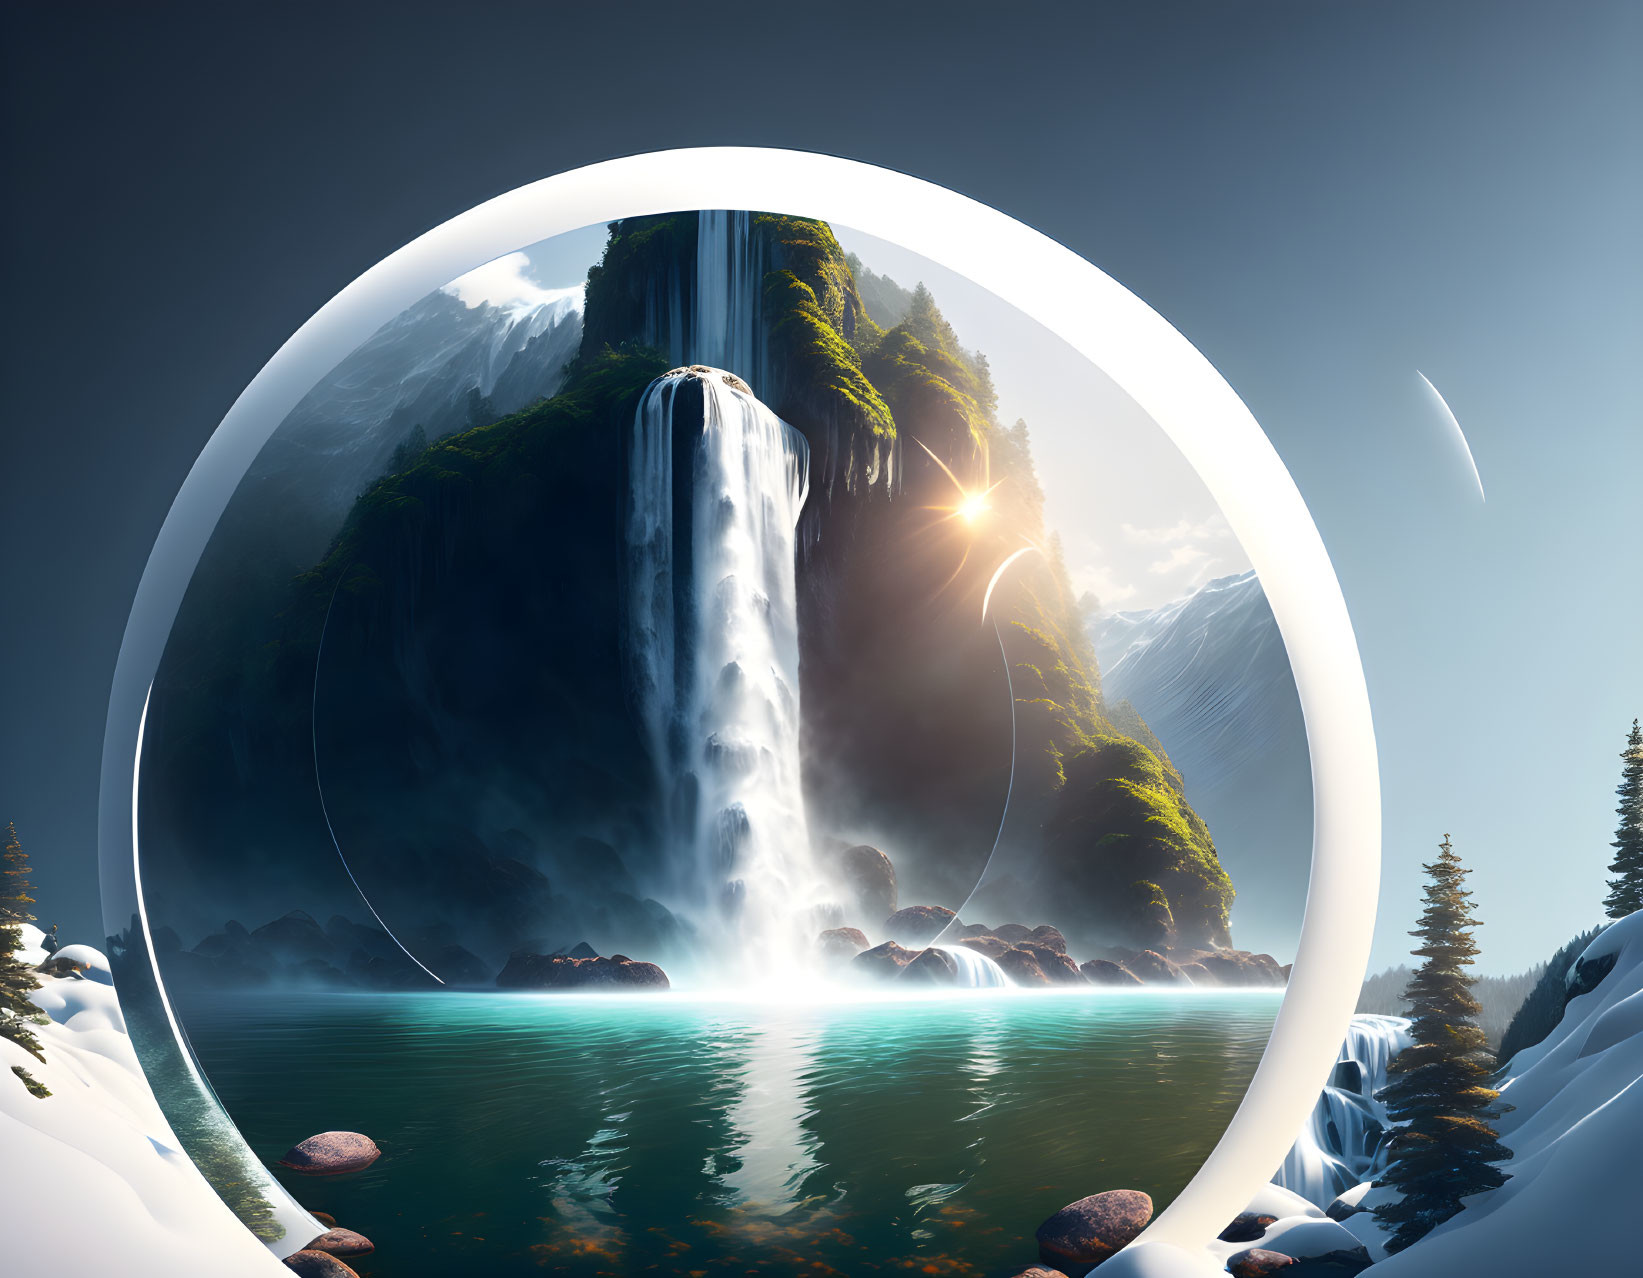 Majestic waterfall in surreal oval landscape with cliffs and fir trees